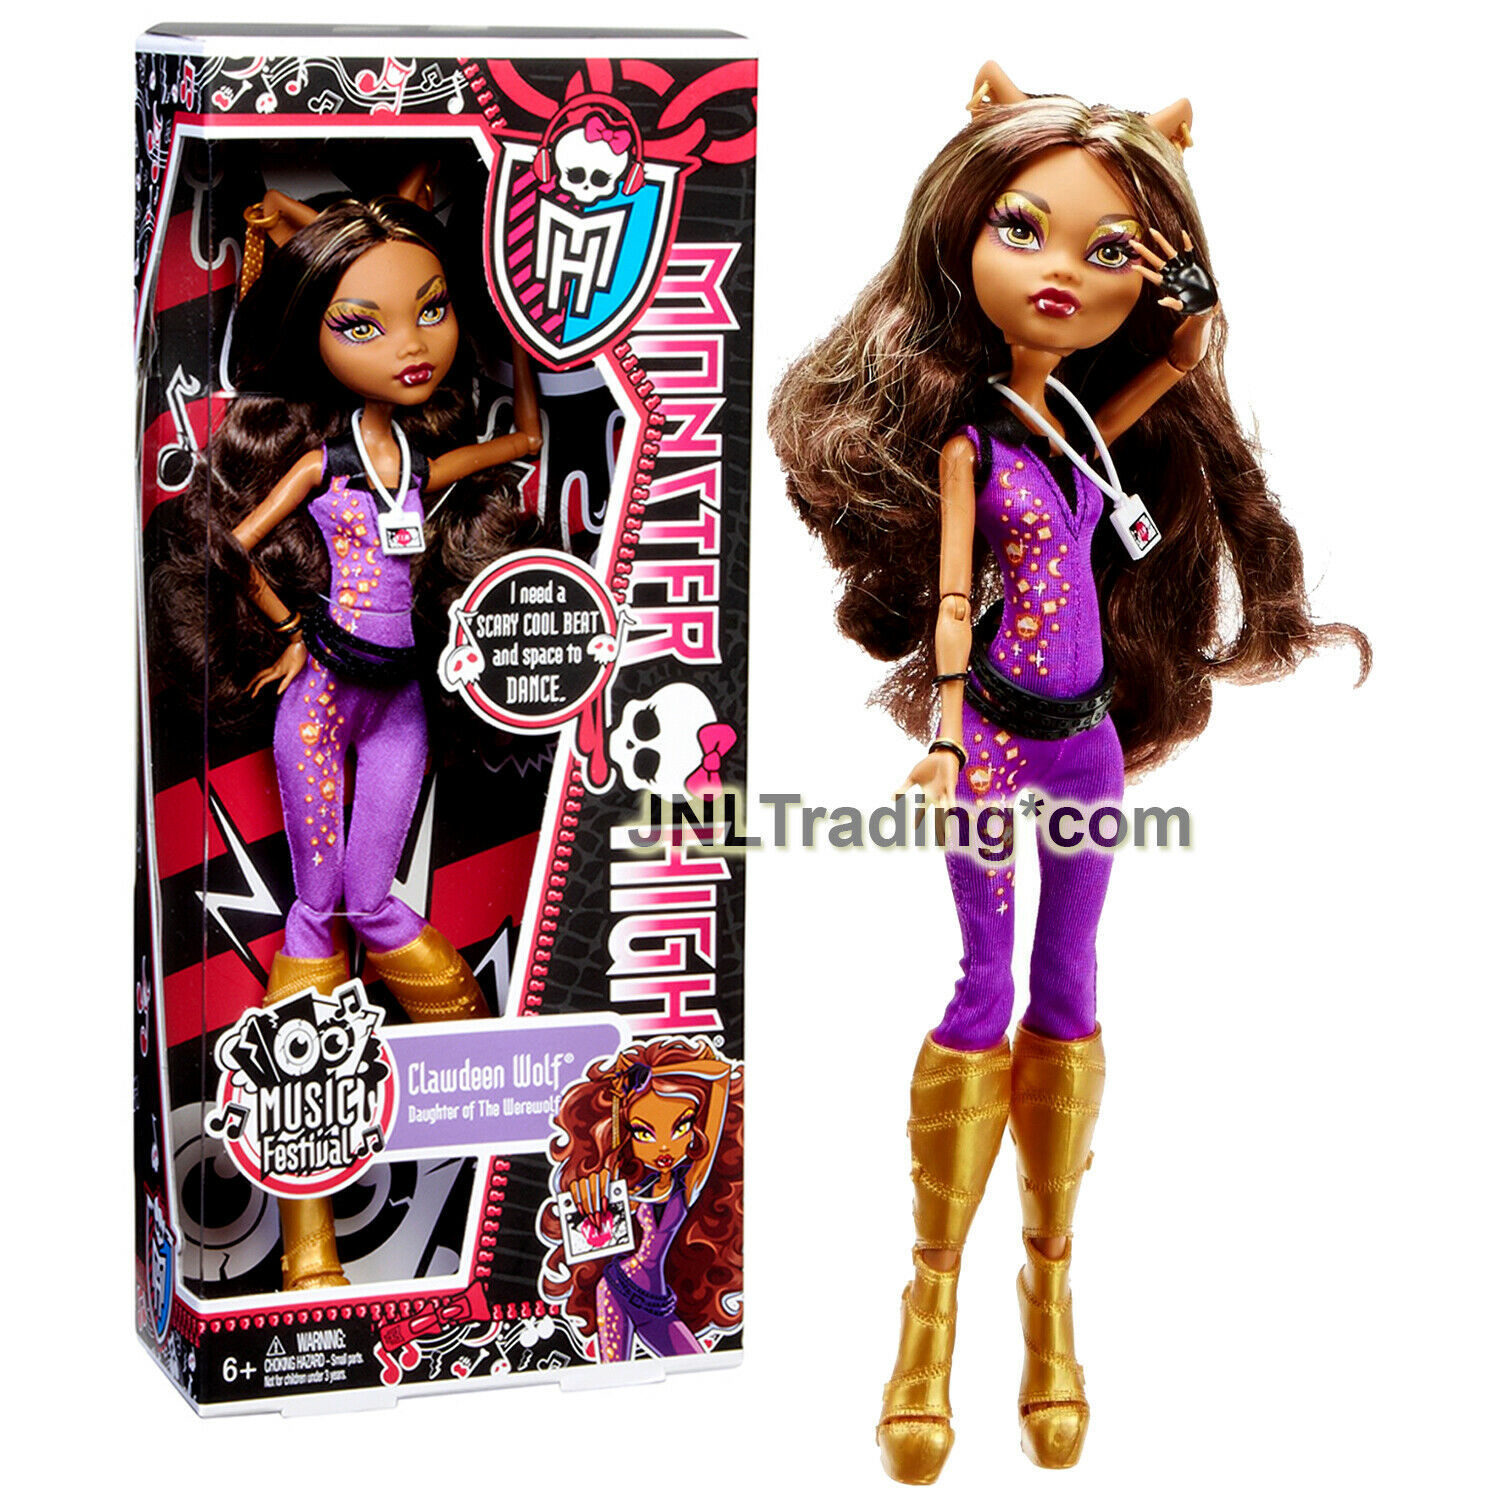 Primary image for Year 2012 Monster High Music Festival 11" Doll - Werewolf Daughter CLAWDEEN WOLF